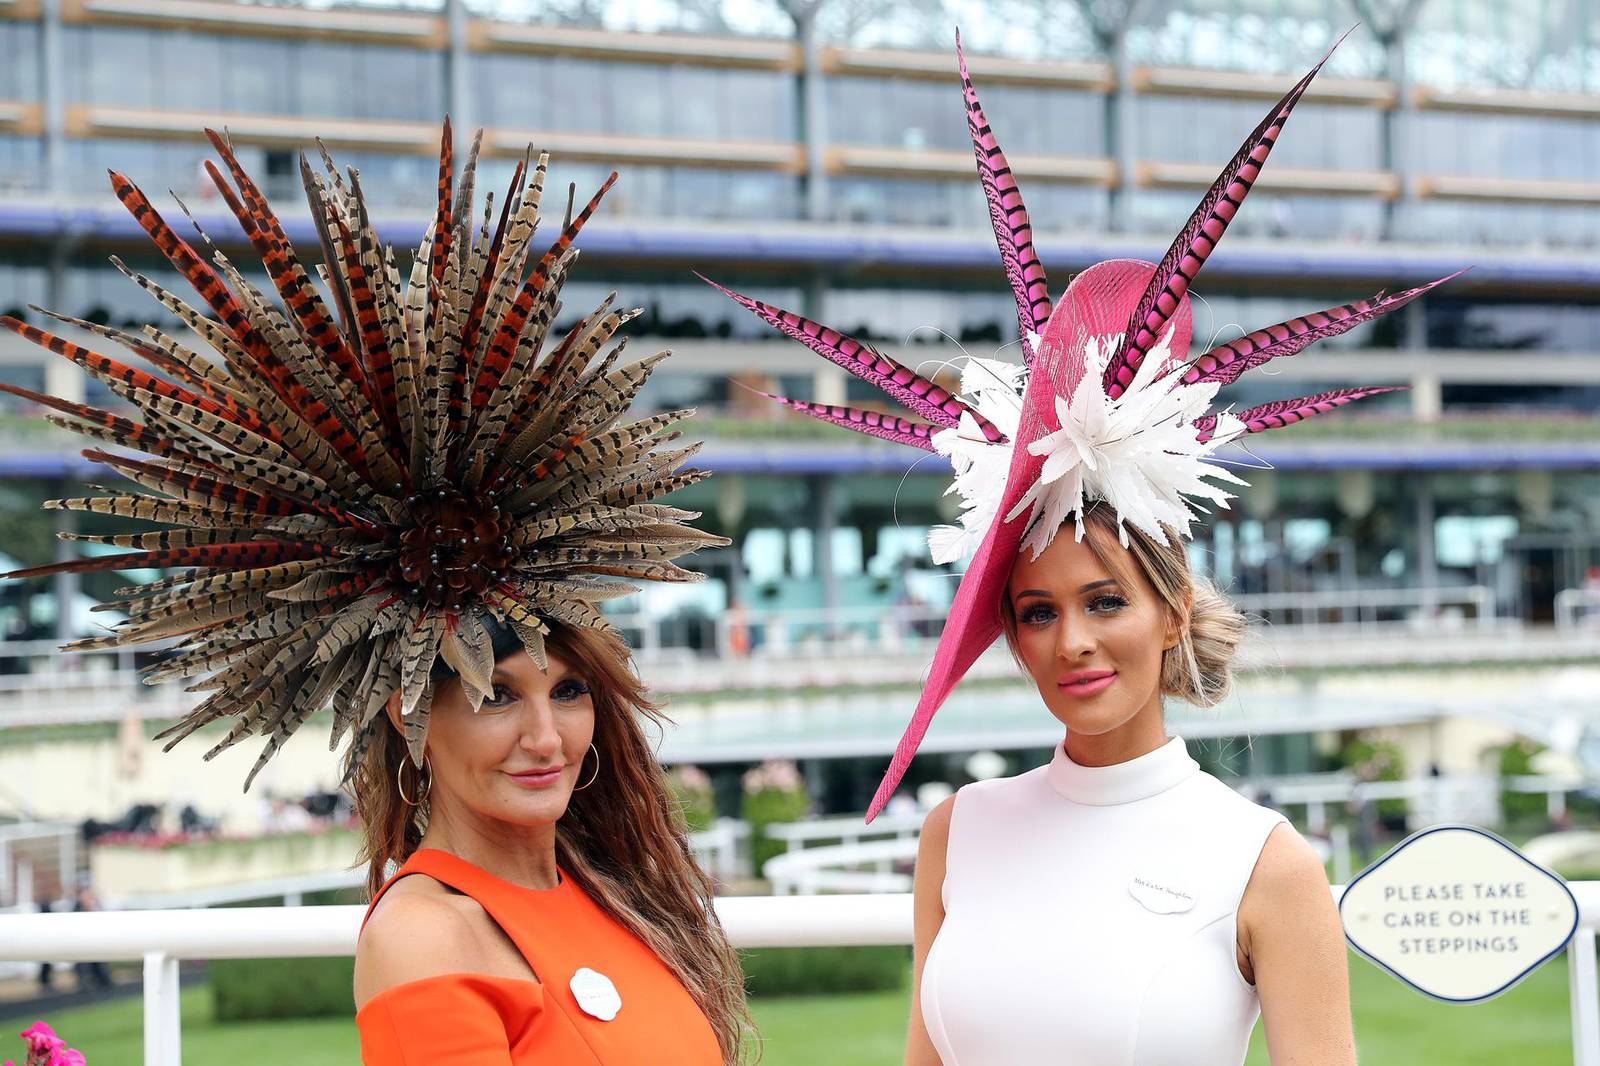 38 of the best looks from Ladies' Day at Royal Ascot in pictures